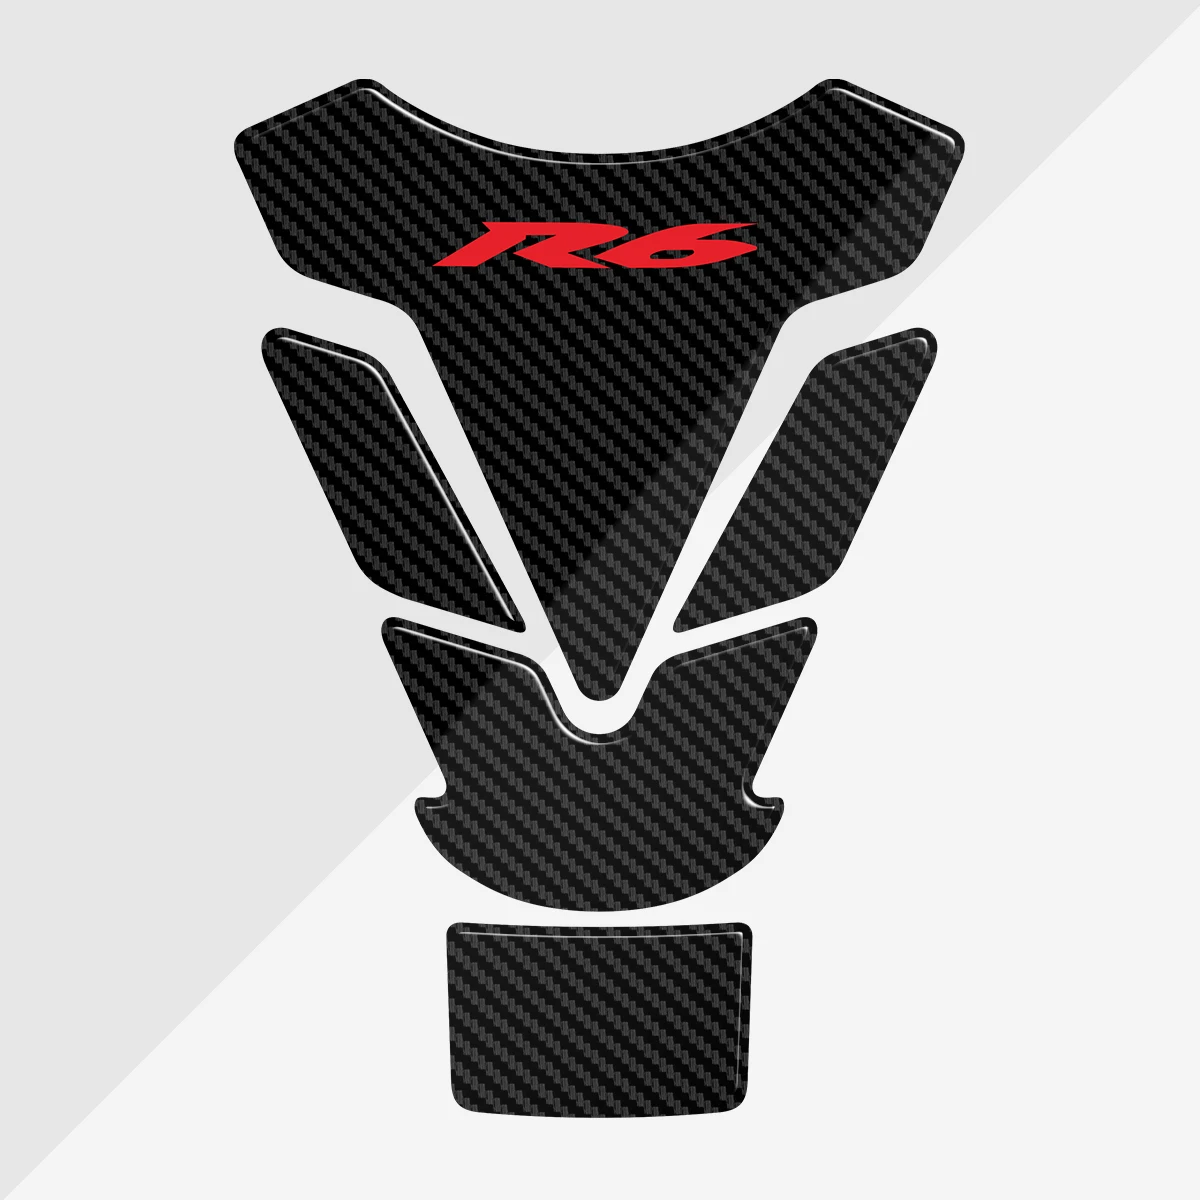 For Yamaha Motorrad YZF-R6 R6 R 6 R6S 3D Motorcycle Tank Pad Sticker Protector Decal Accessories